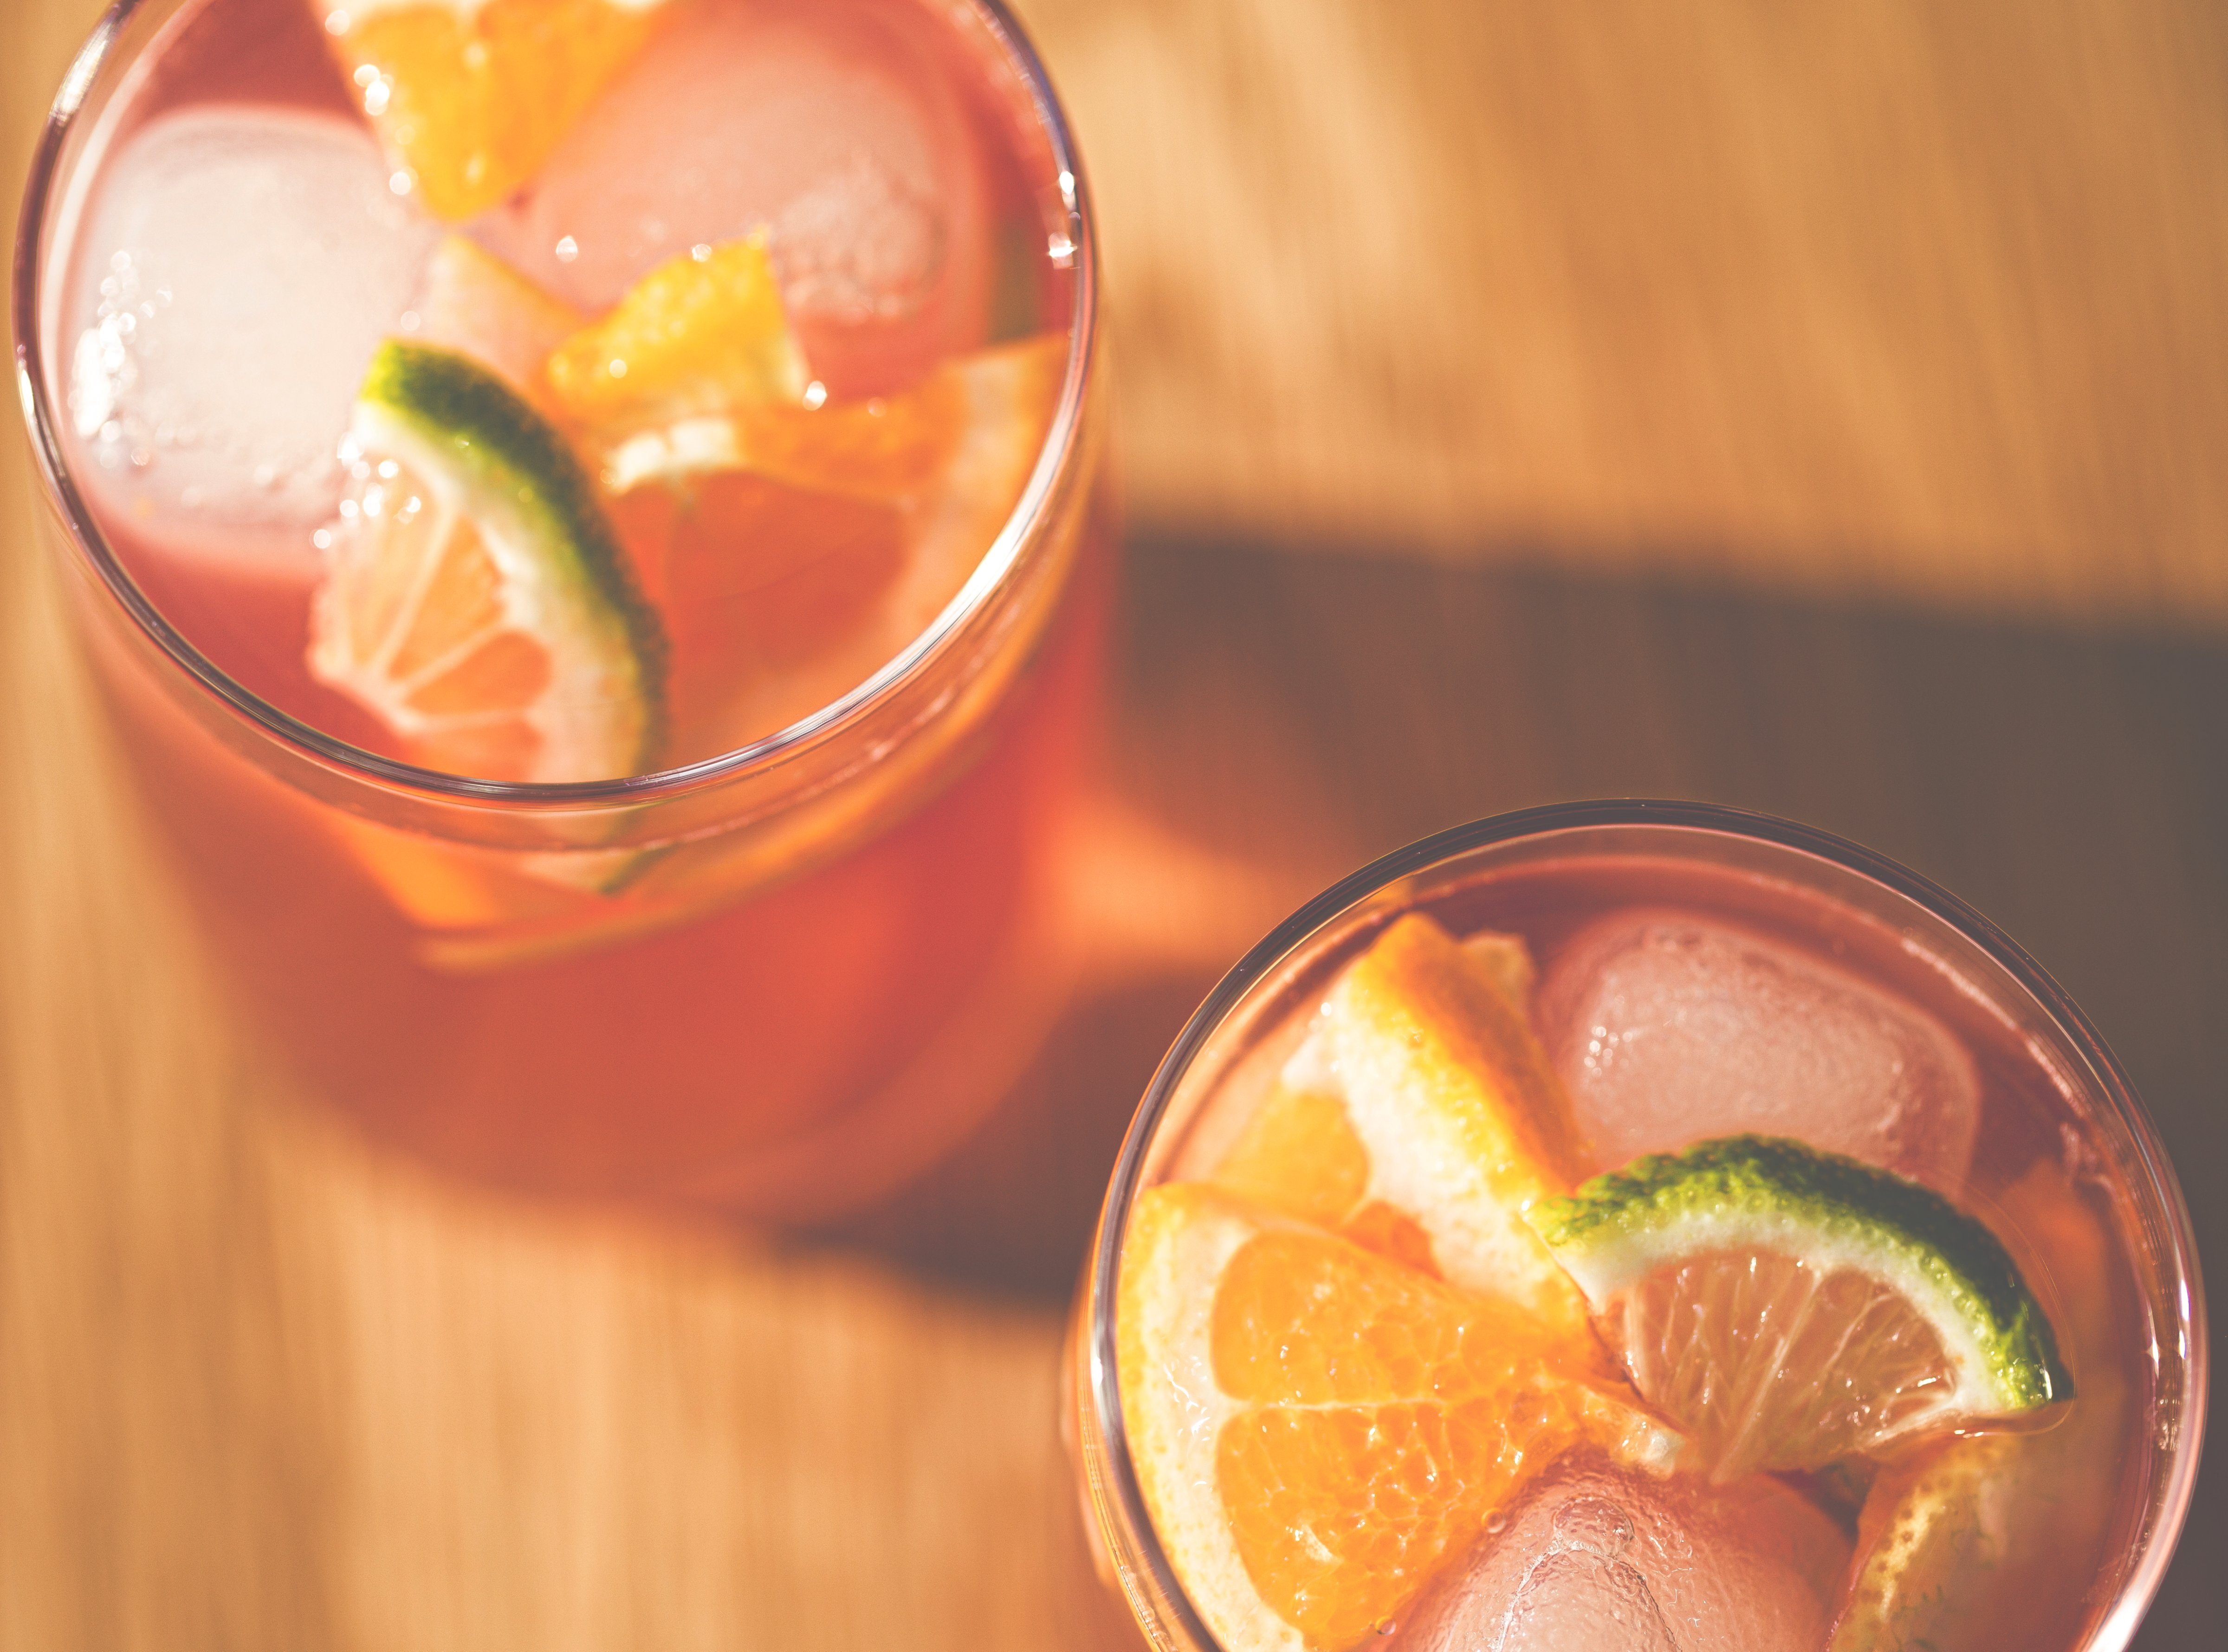 Top down view of 2 glasses of fruity punch with ice cubes and slices of lime and orange. (Getty Images)